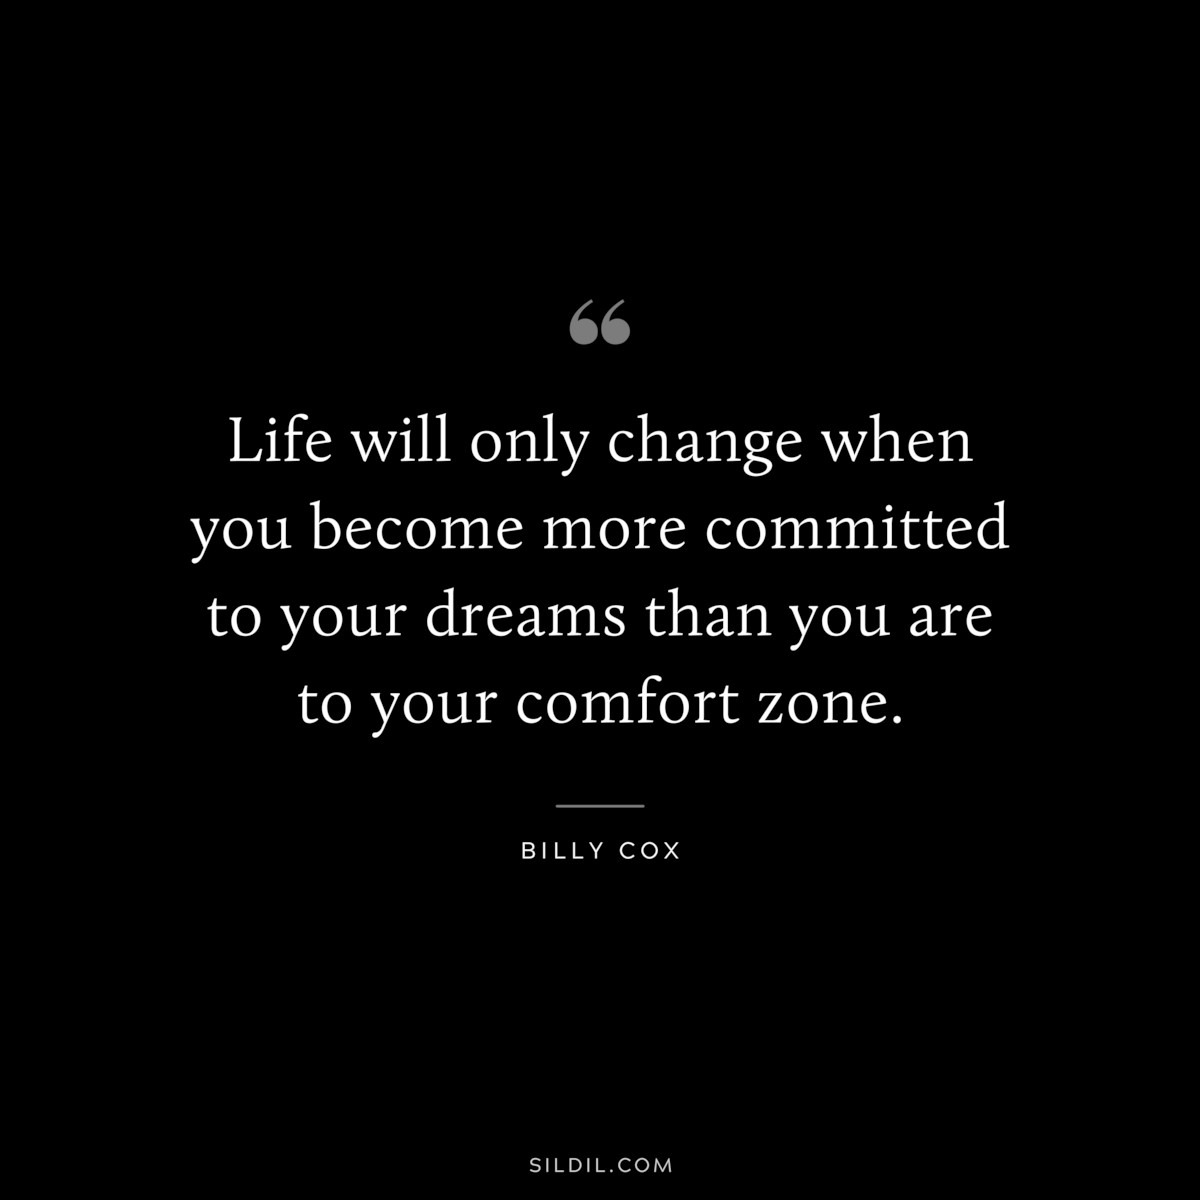 Life will only change when you become more committed to your dreams than you are to your comfort zone. ― Billy Cox